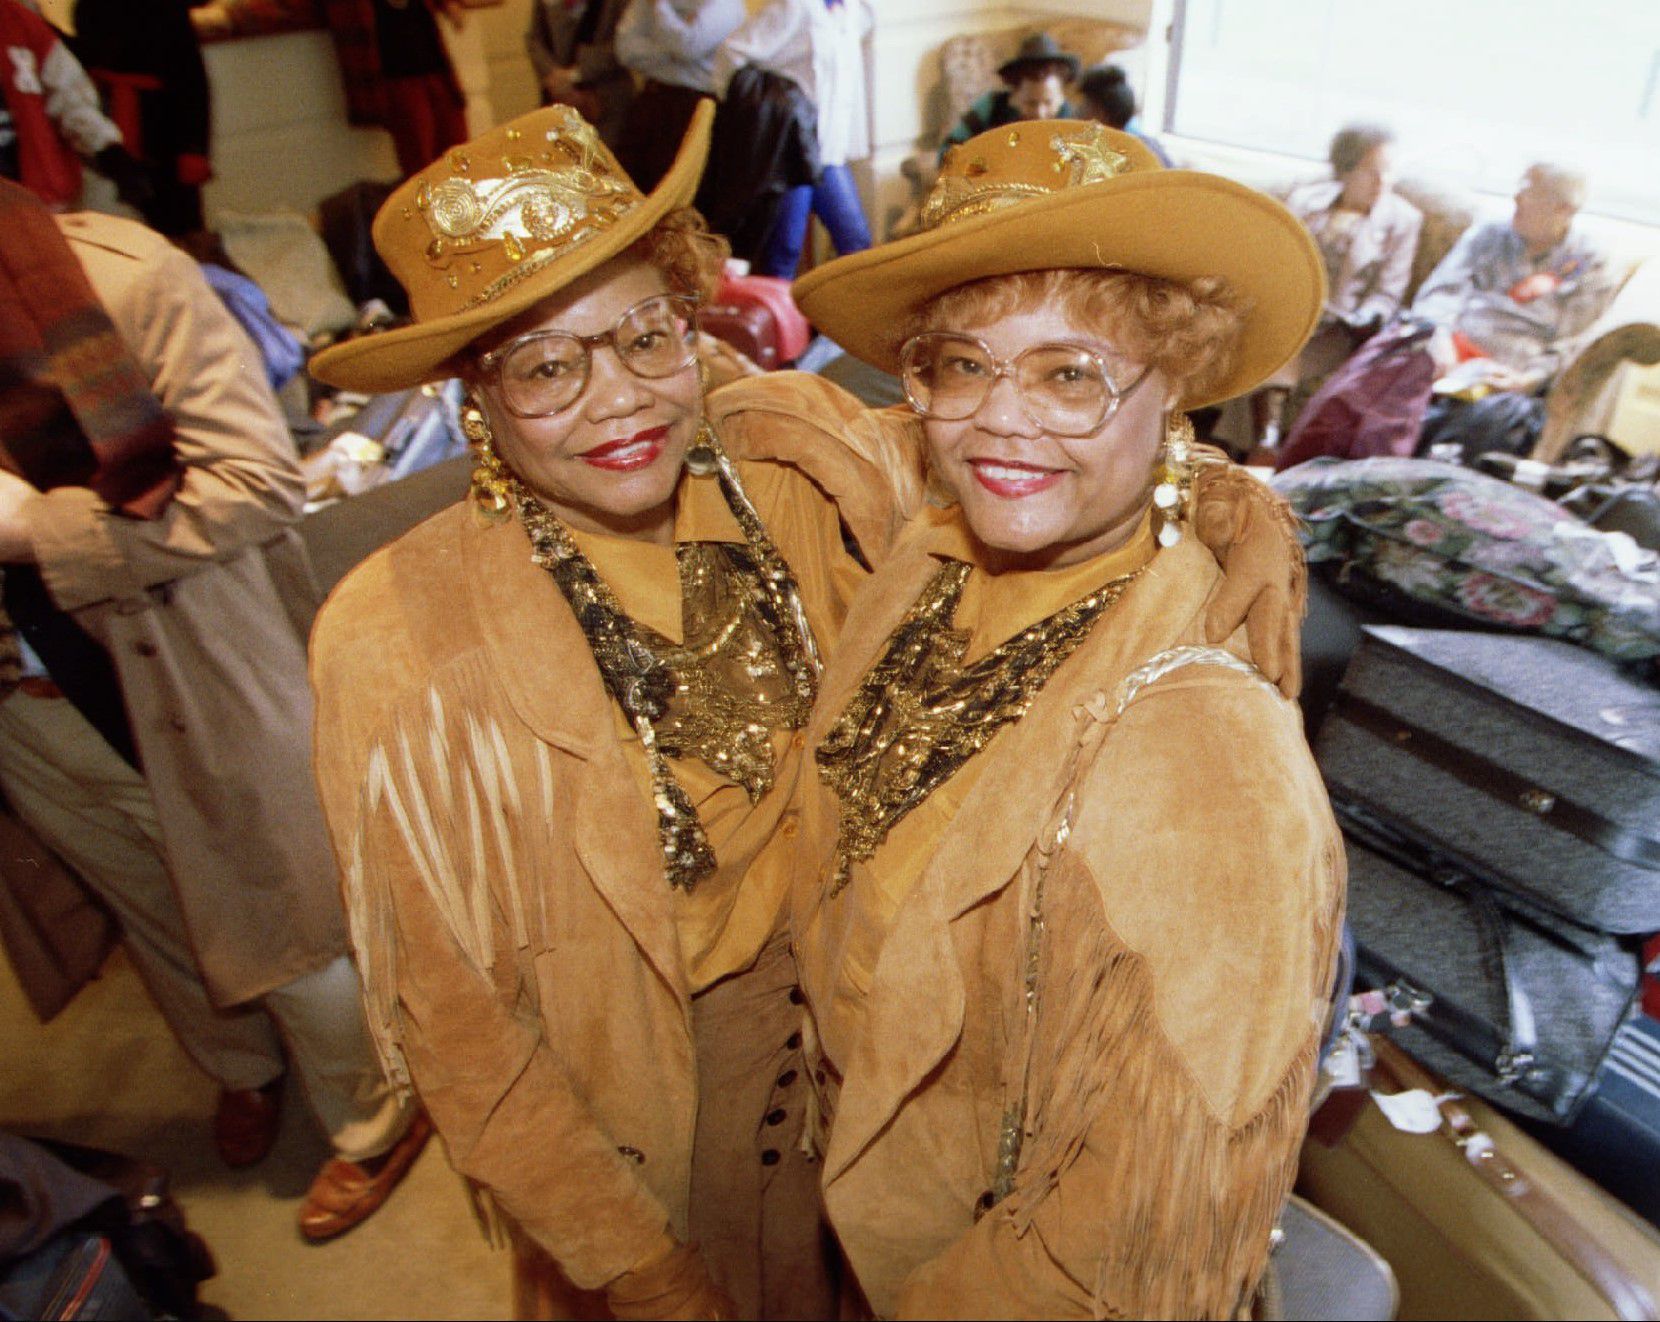 Nina Nell Daniels Wheeler (left) and Ina Bell Daniels McGee liked to dress up in gold-hued colors and called themselves the "Gold Twins of Dallas."